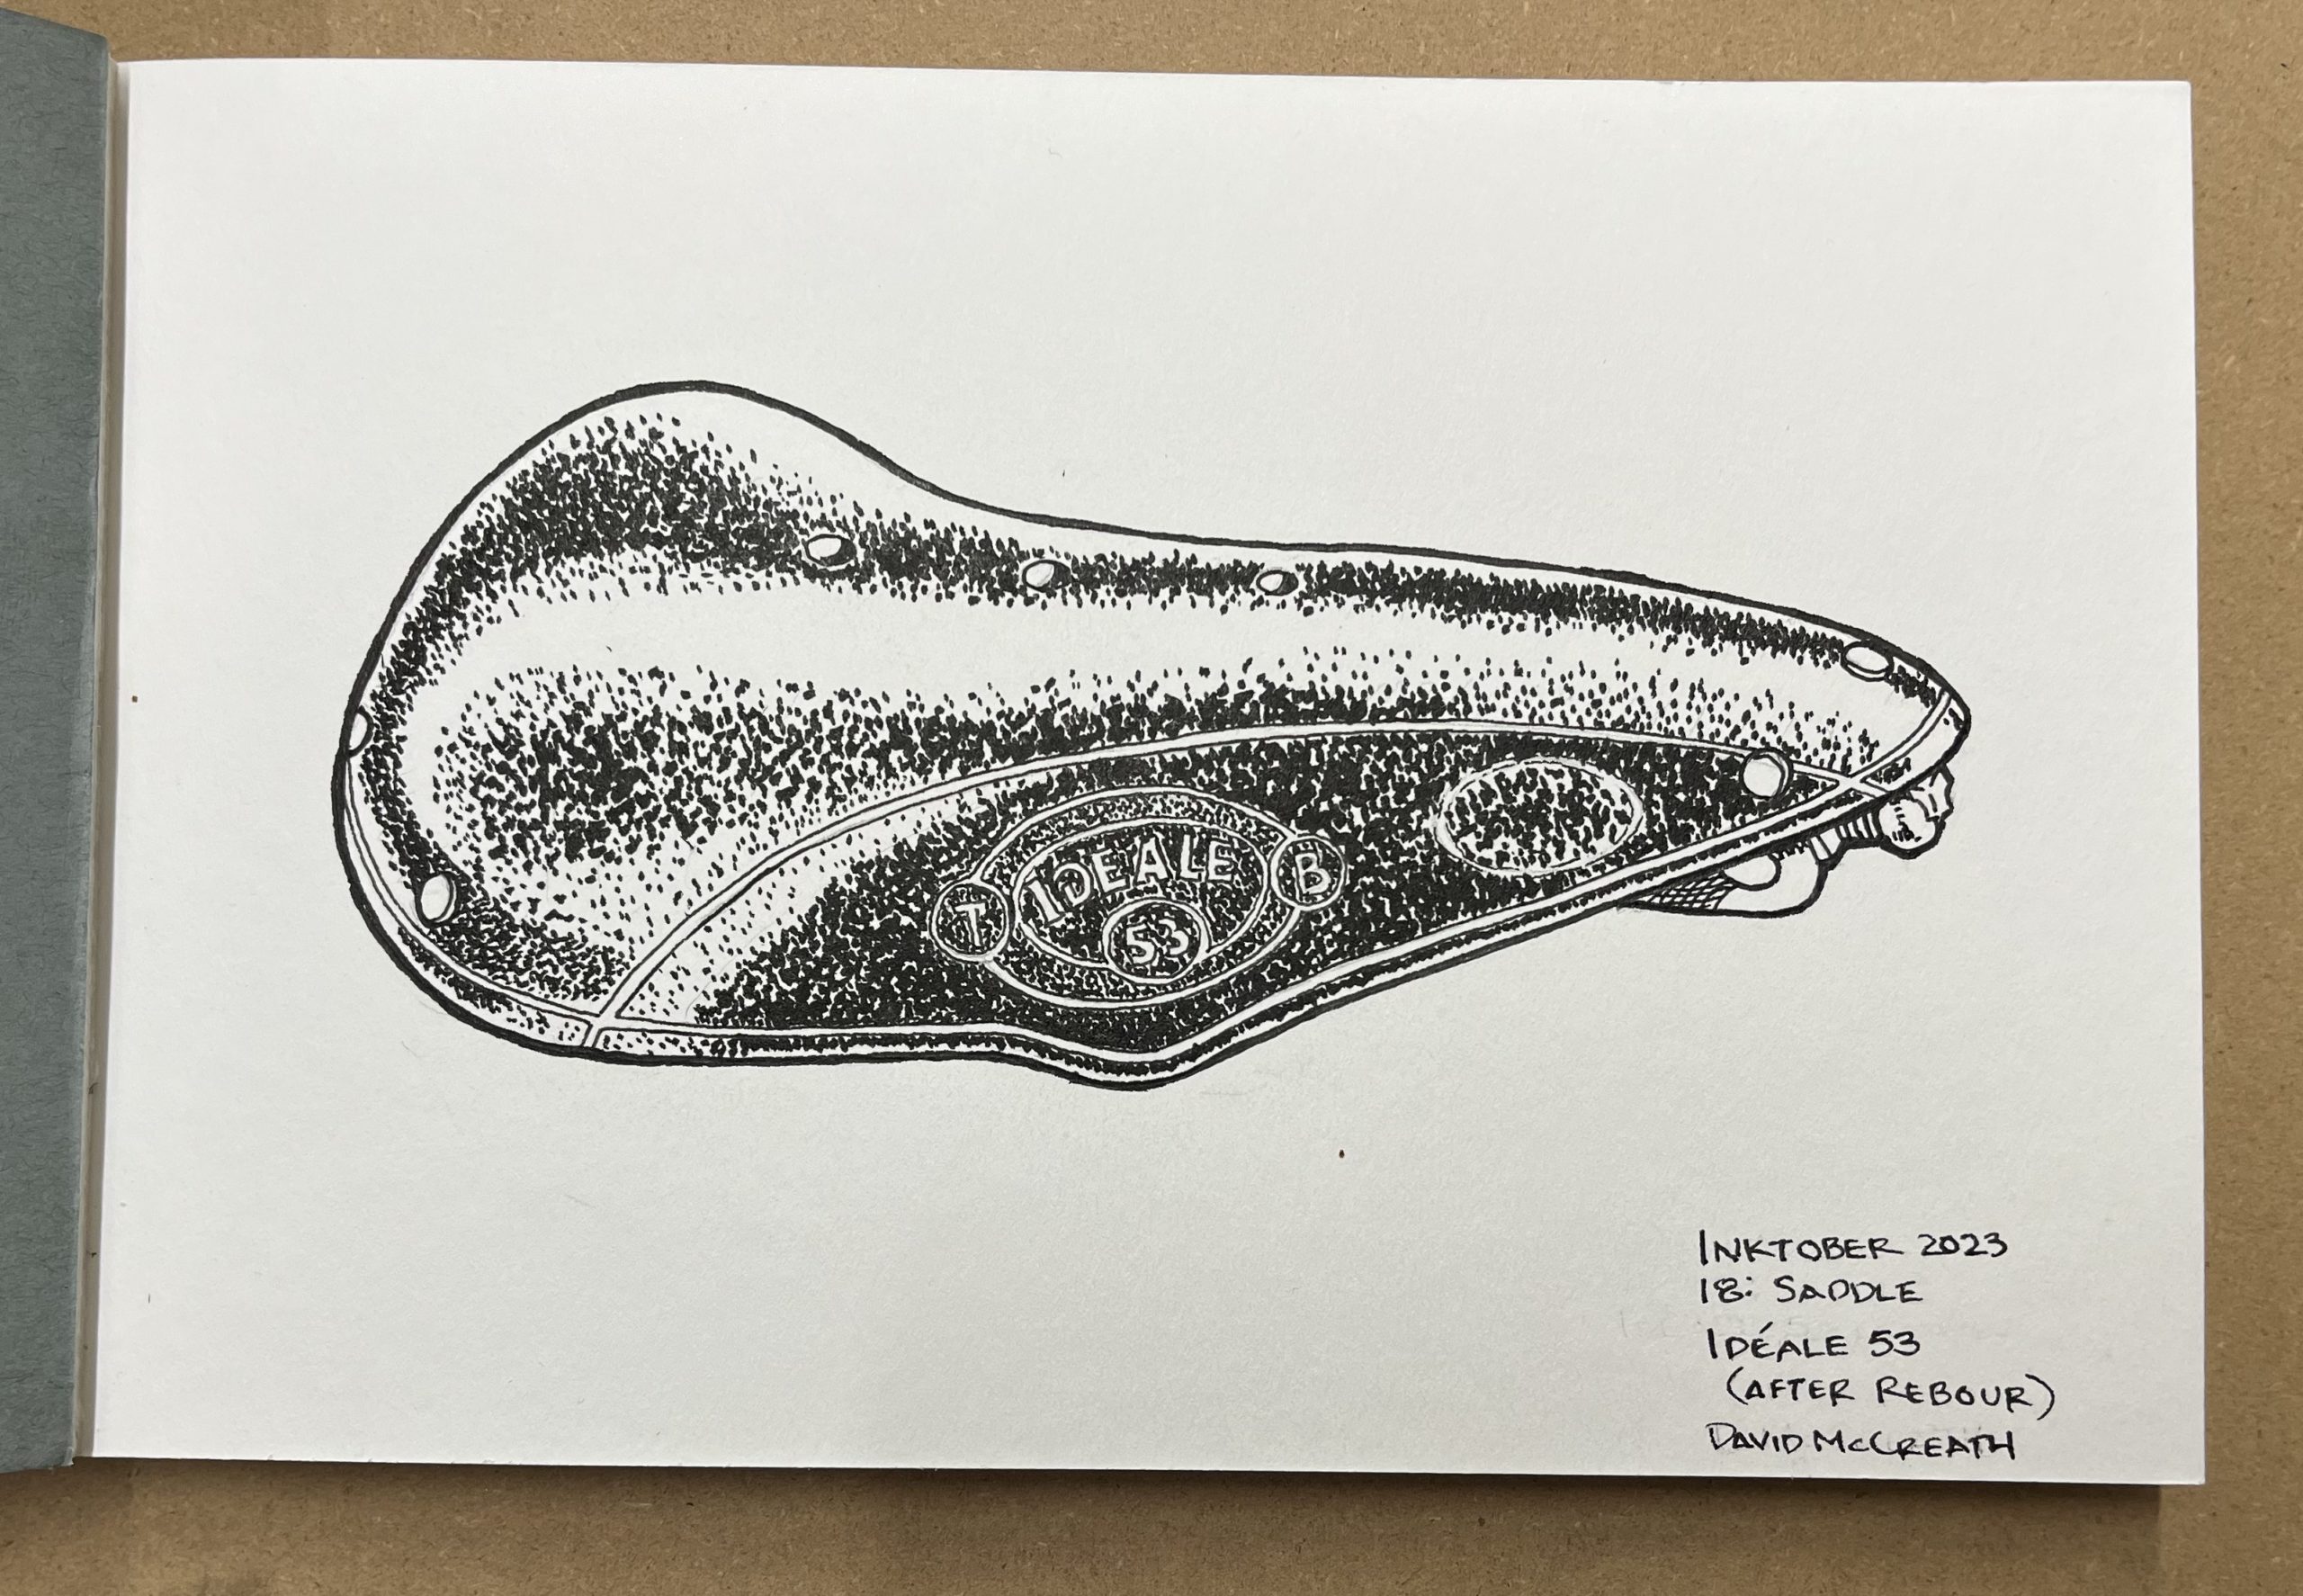 A pen and ink drawing of a leather bicycle saddle in the style of artist Daniel Rebour.